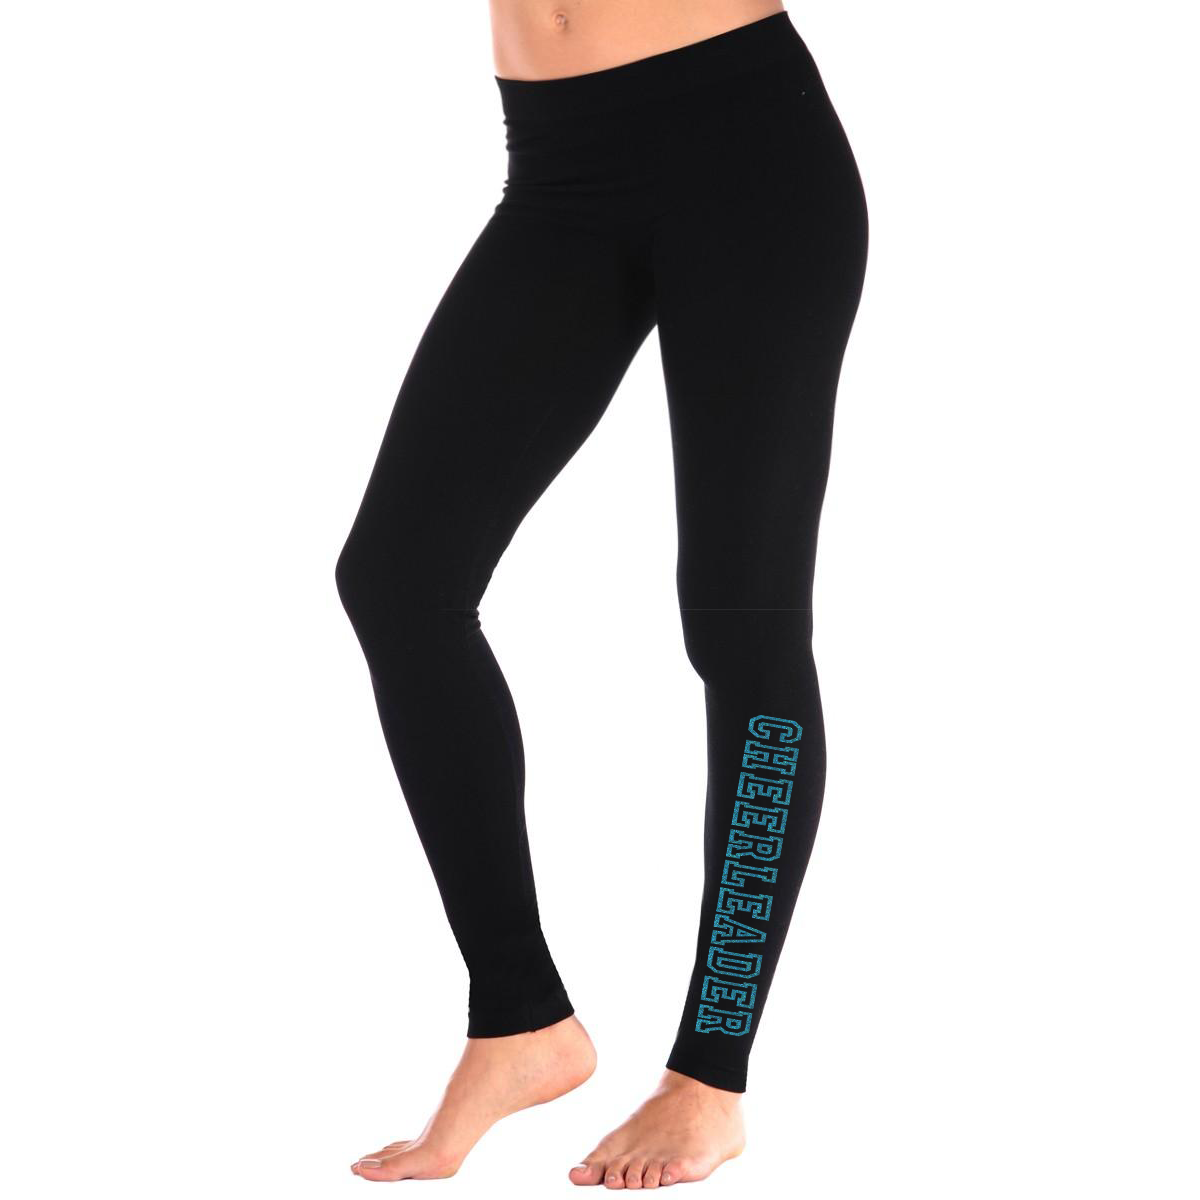 Under Armour Volleyball Athletic Leggings for Women